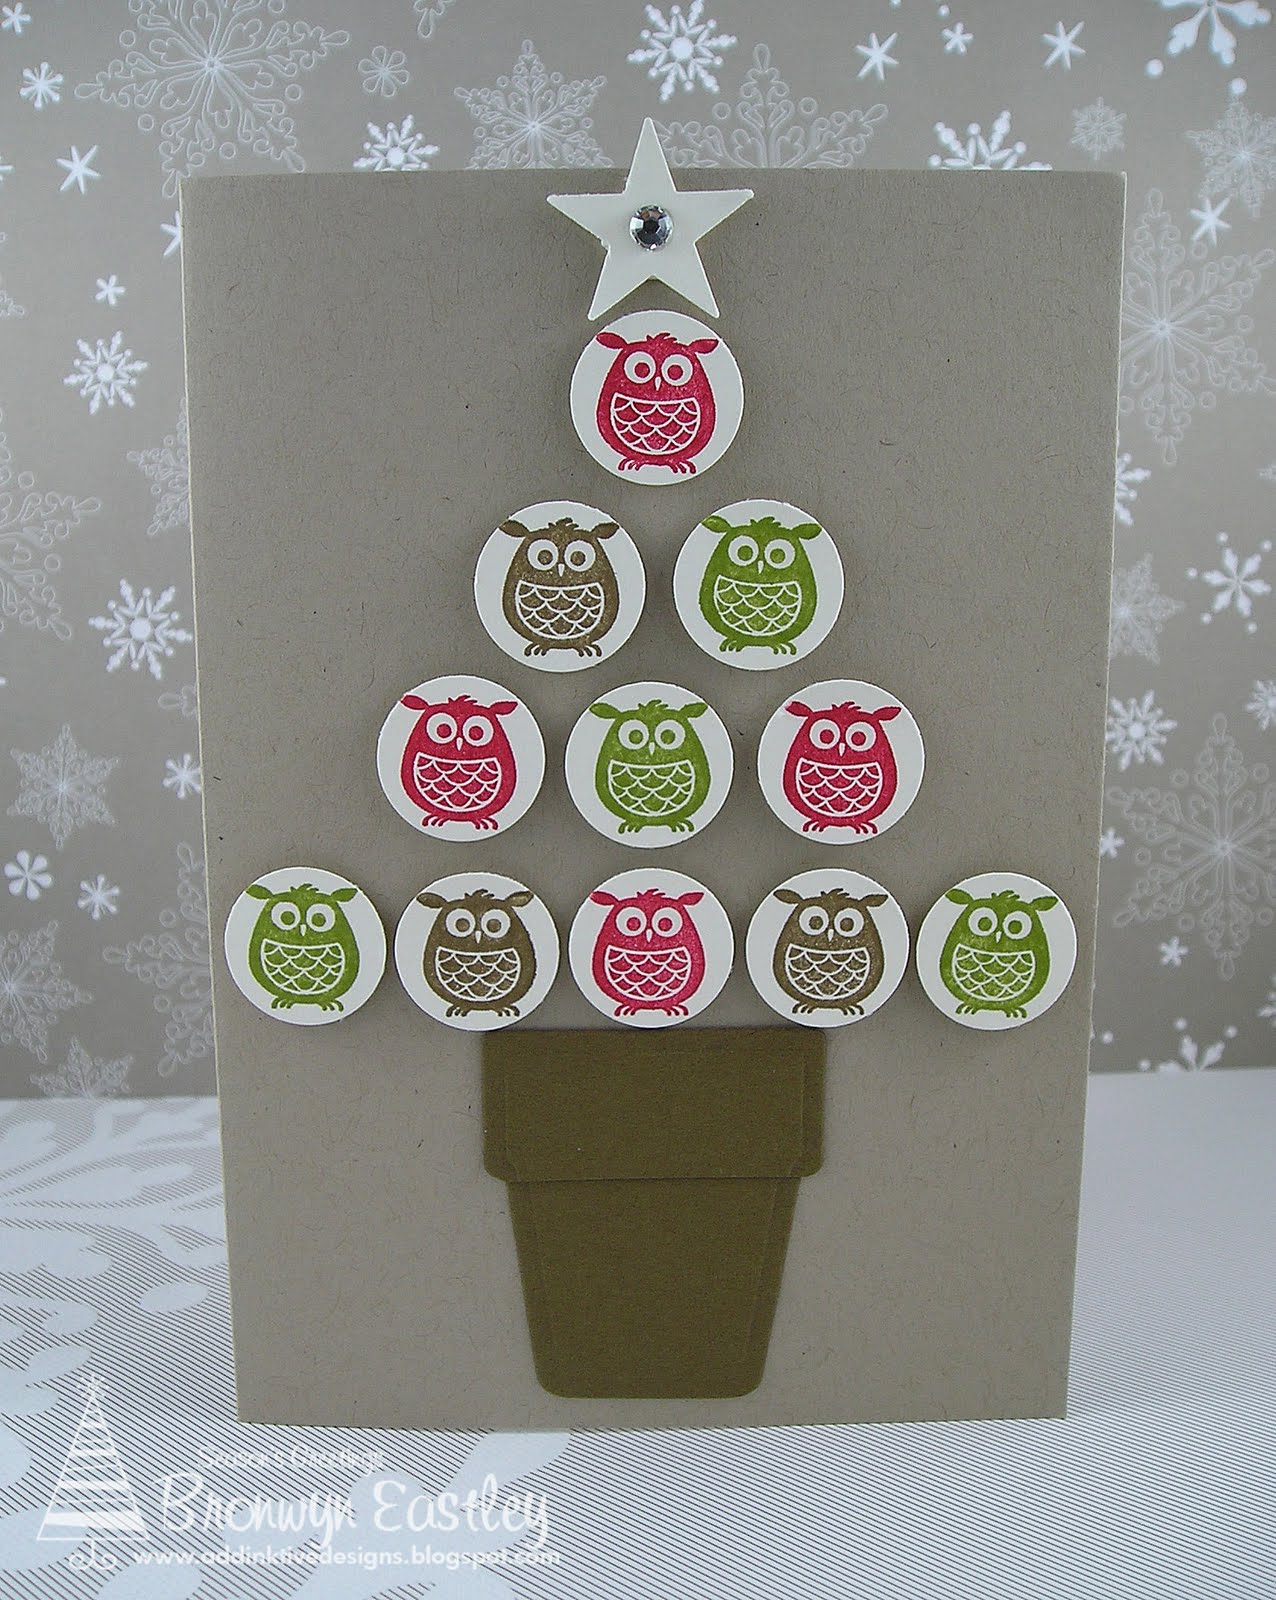 AddINKtive designs: Quick and Easy Christmas Cards